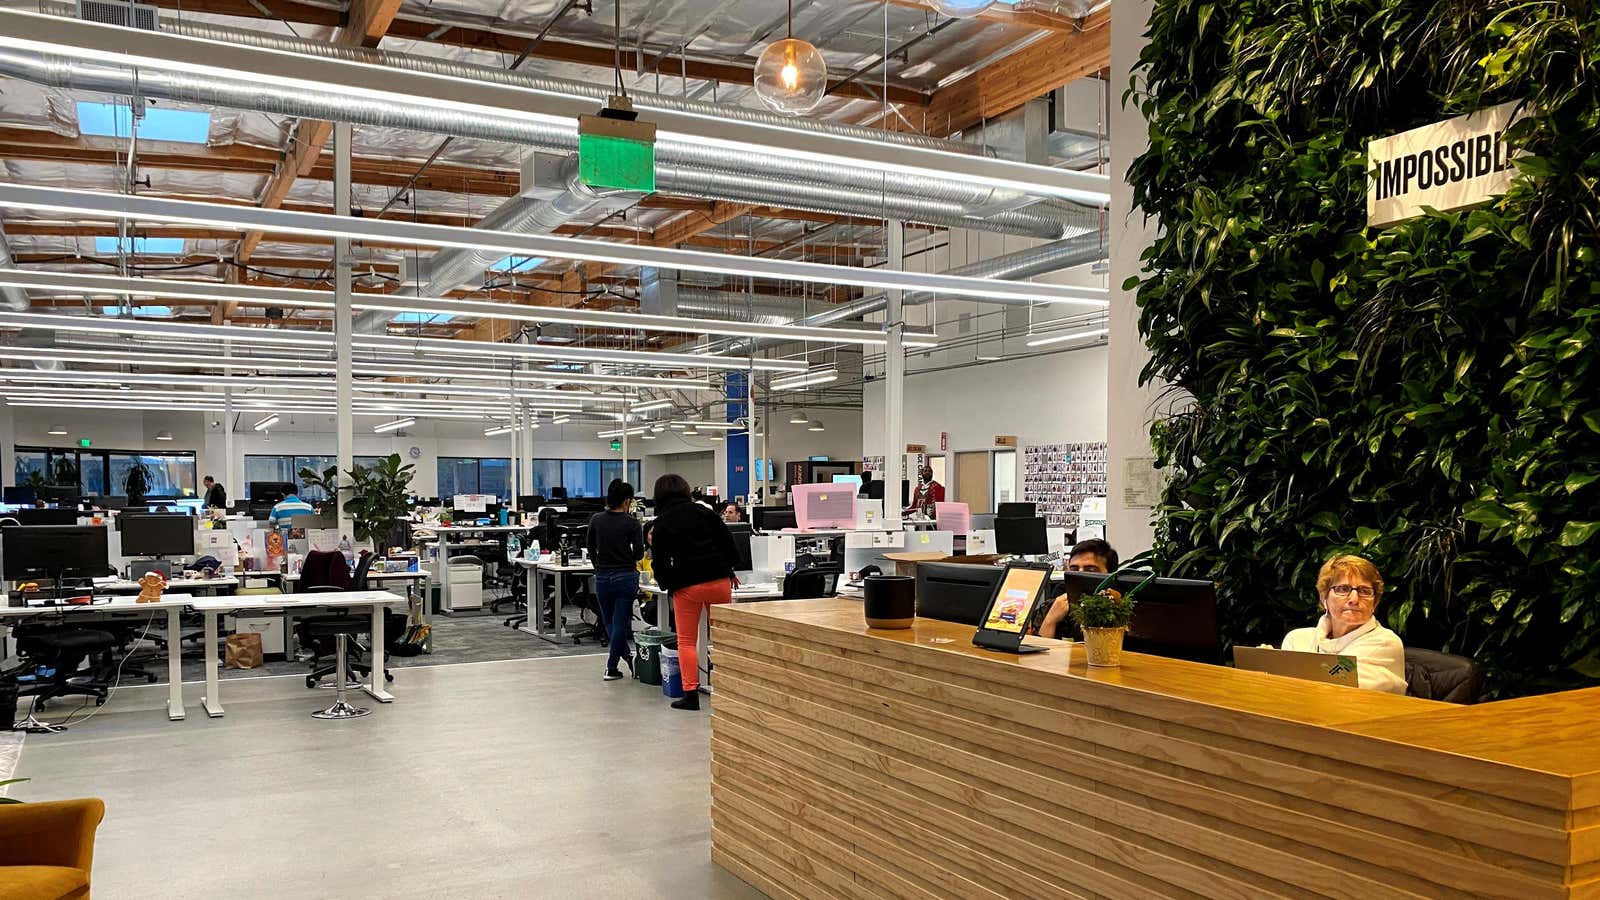 US tech companies are shedding their office leases